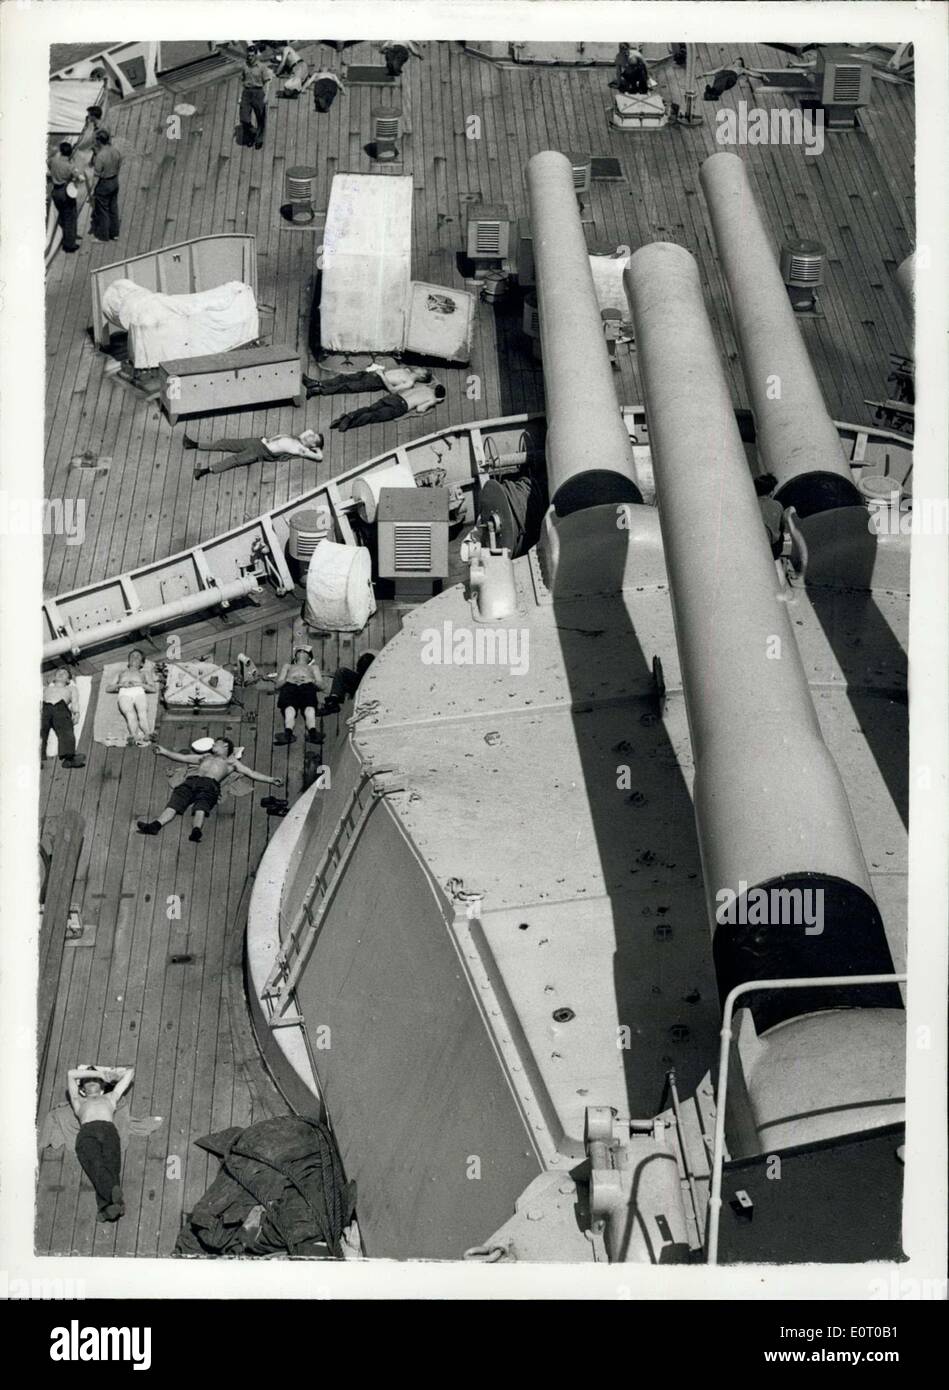 May 31, 1960 - Press Visit to H.M.S. Vanguard - For Last Time w Sunbathing: Members of the Press paid a visit to the batten s Stock Photo